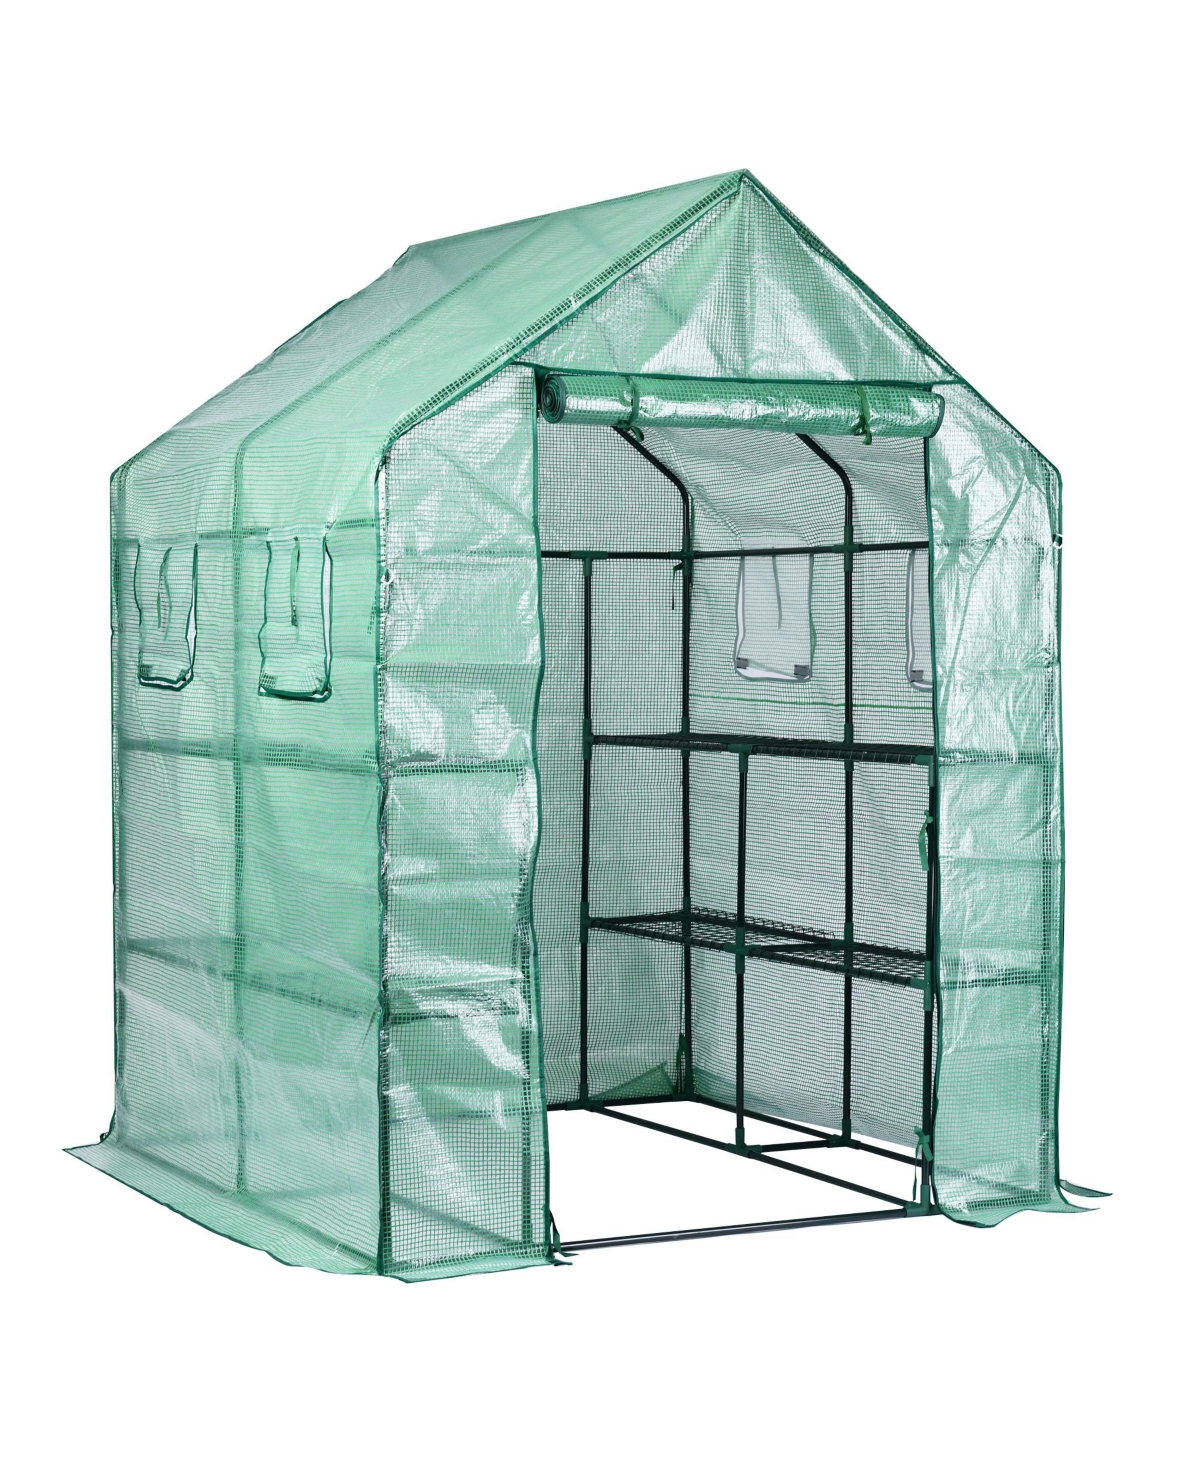 Personal Plastic Indoor Outdoor Standing Greenhouse For Seed Starting and Propagation, Frost Protection Green, Large, 77 Inches x 56 I